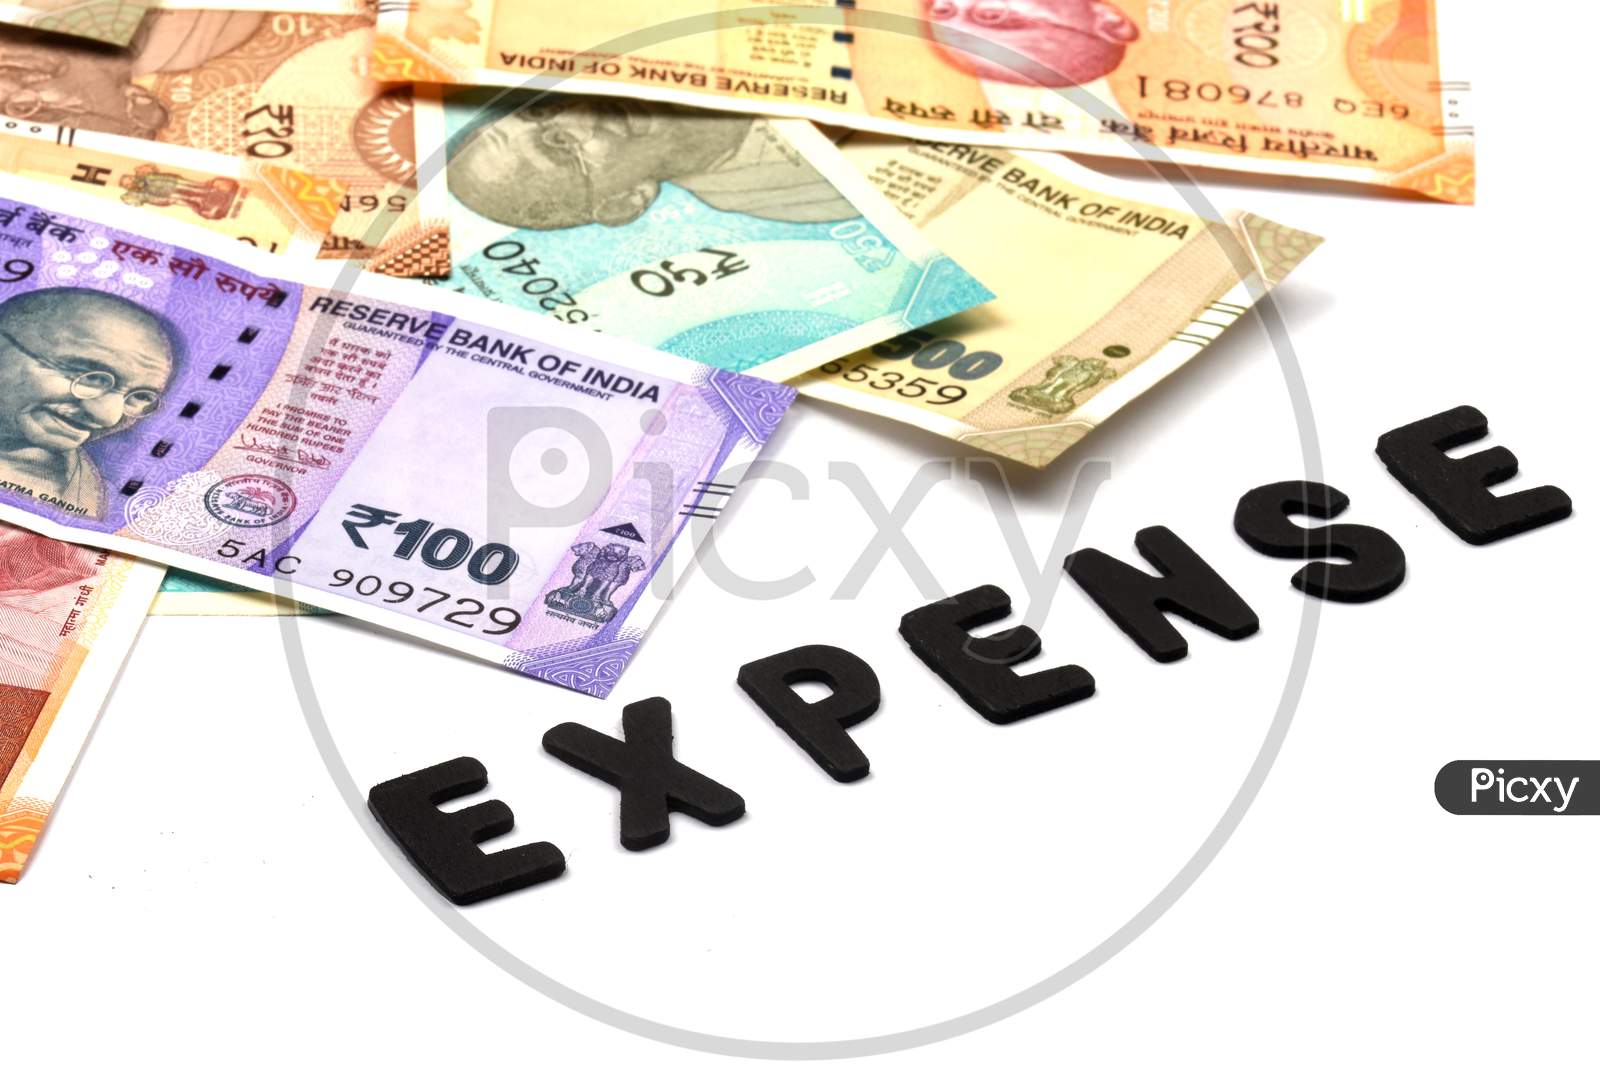 Expense Concept,Expense Alphabet On Money Background,Indian Currency, Rupee, Indian Rupee,Indian Money, Business, Finance, Investment, Saving And Corruption Concept - Image